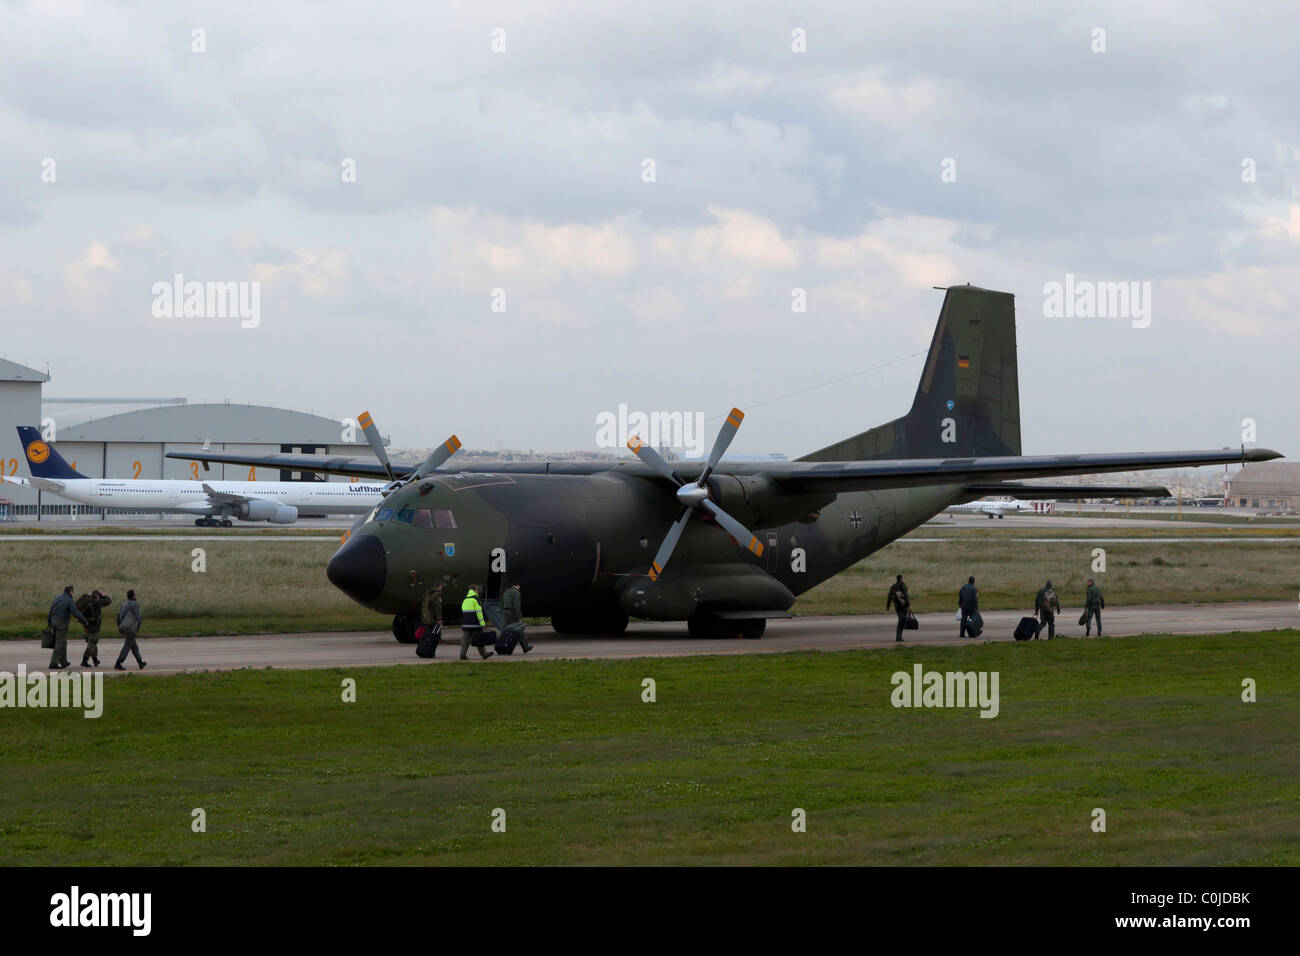 German Air Force Hercules C-130 aircraft use Malta as hub and transit point for evacuation operations from Libya Stock Photo